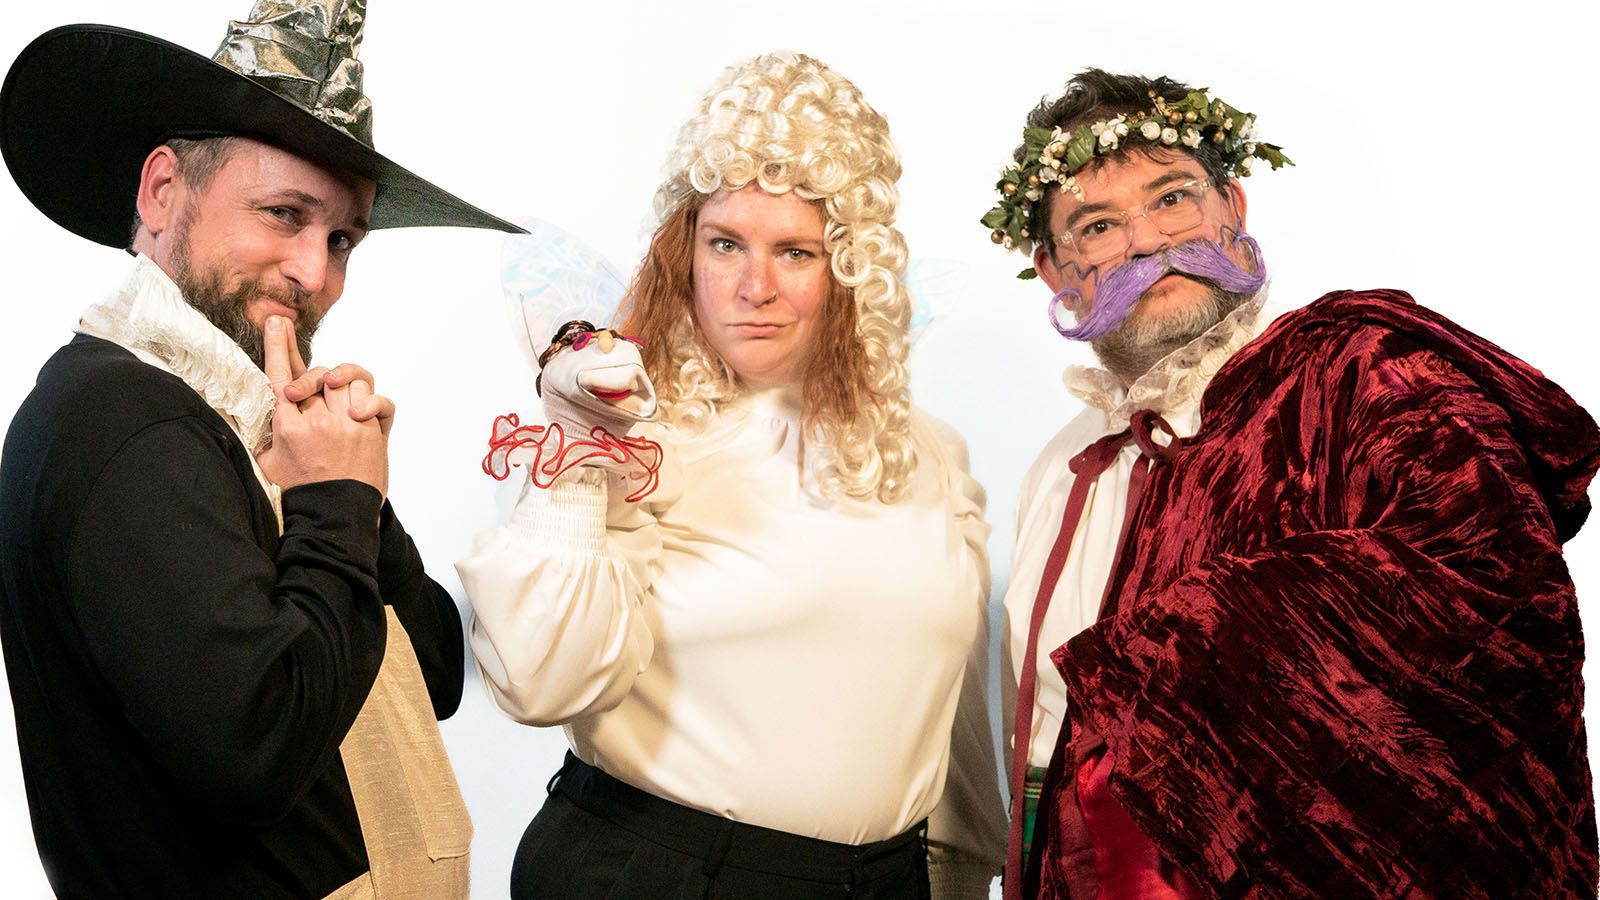 The Fort Wayne Civic Theatre’s production of The Complete Works of William Shakespeare (Abridged) stars, from left, Bob Ahlersmeyer, Hayley Johnson, and Nol Beckley.